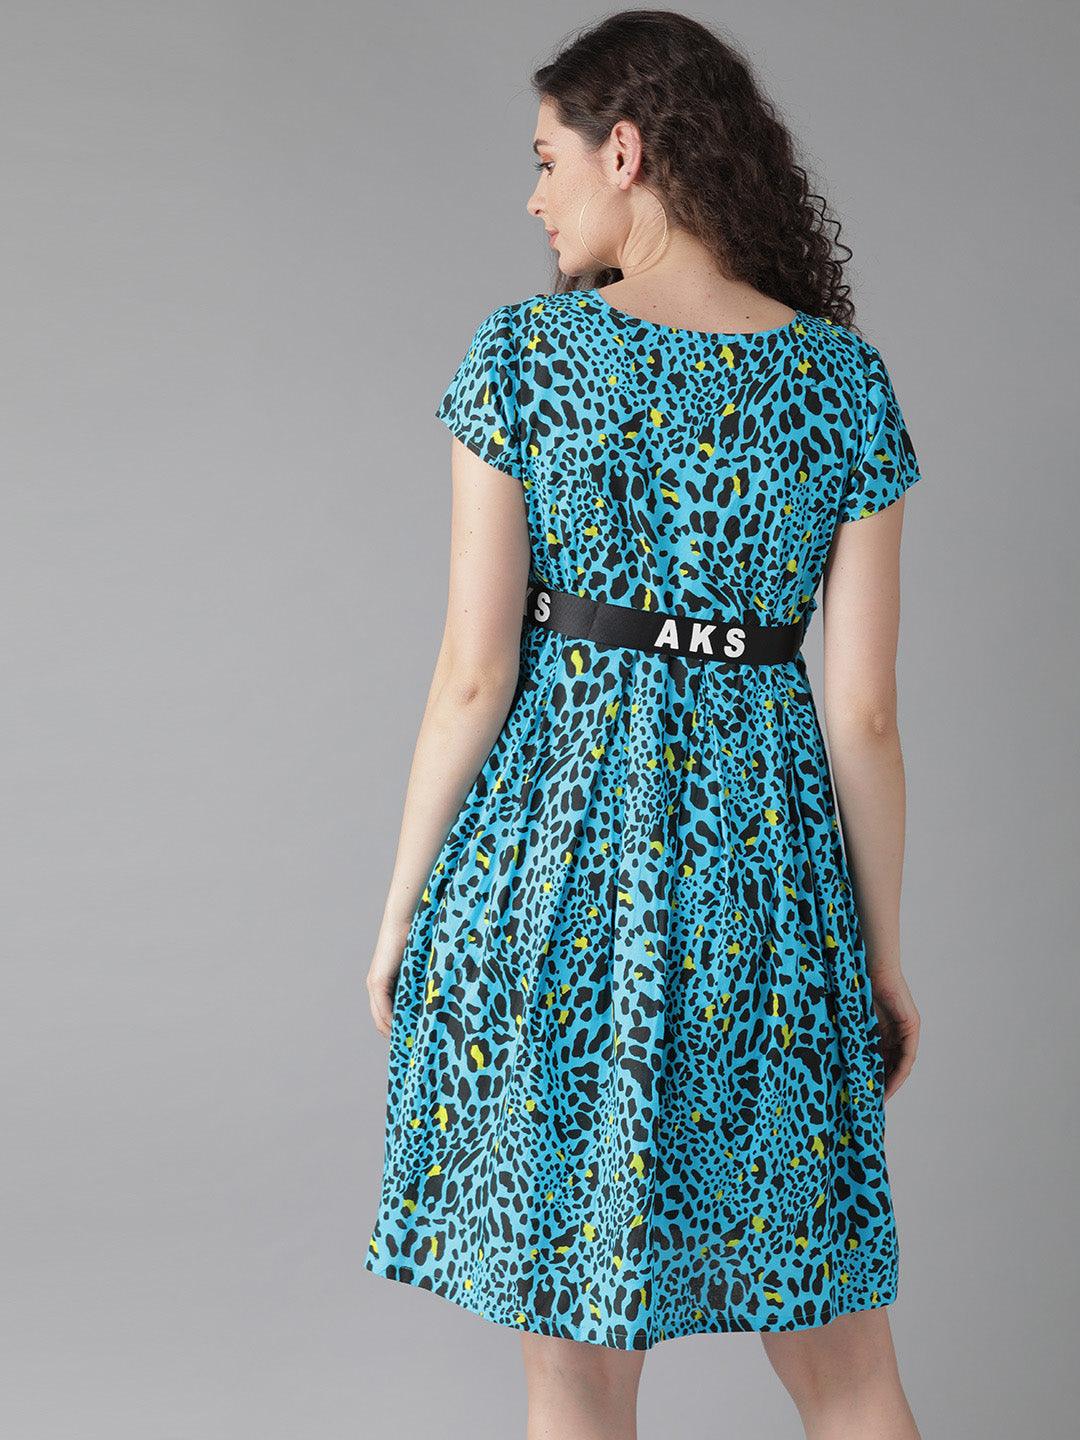 Blue leopard print dress( Fully Stitched) - Znxclothing